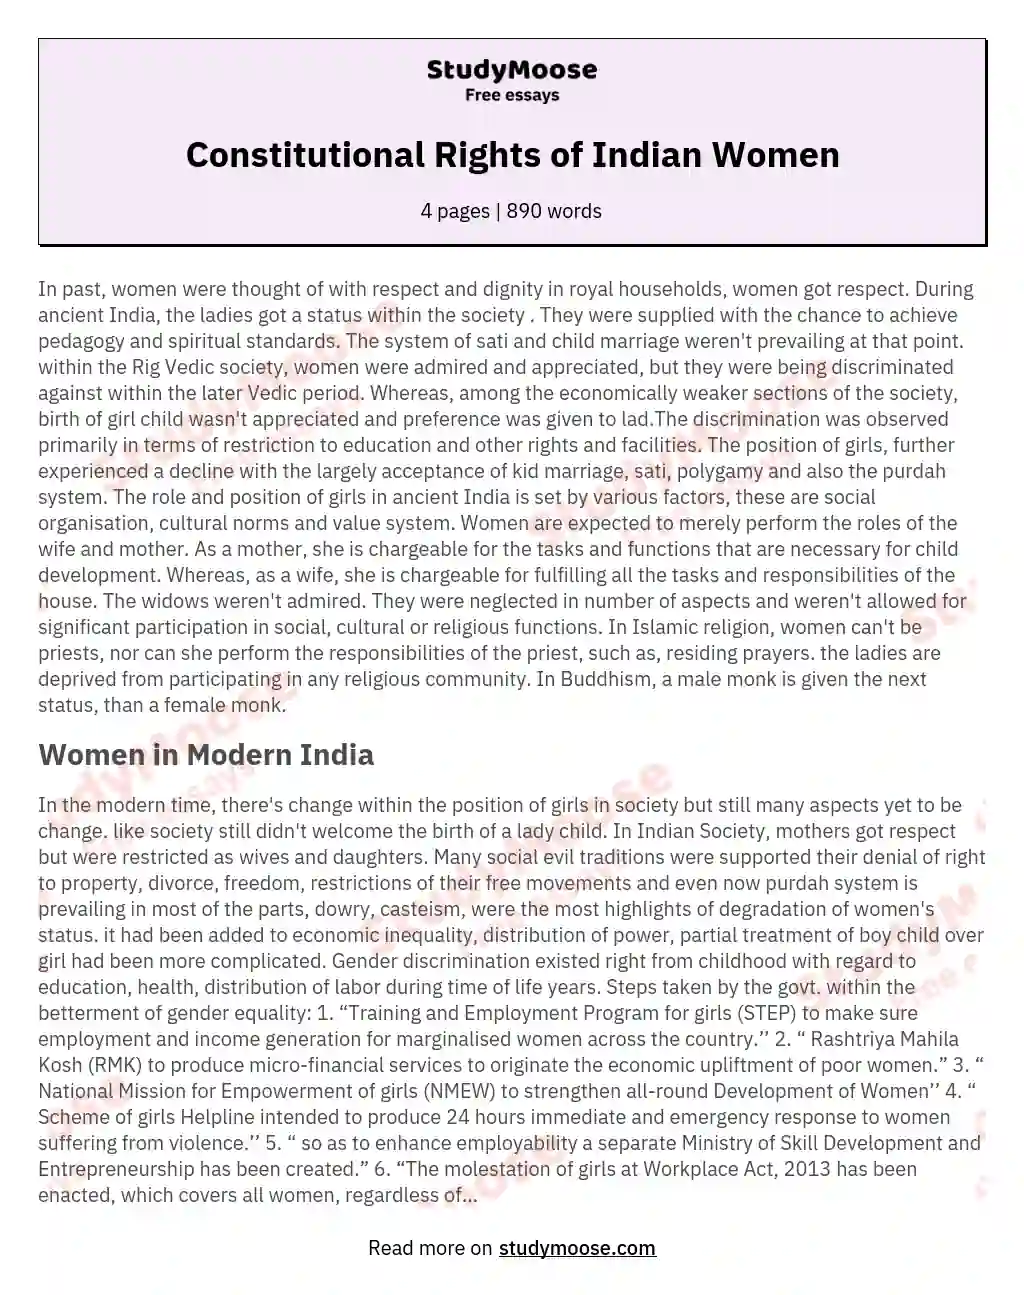 Constitutional Rights of Indian Women essay